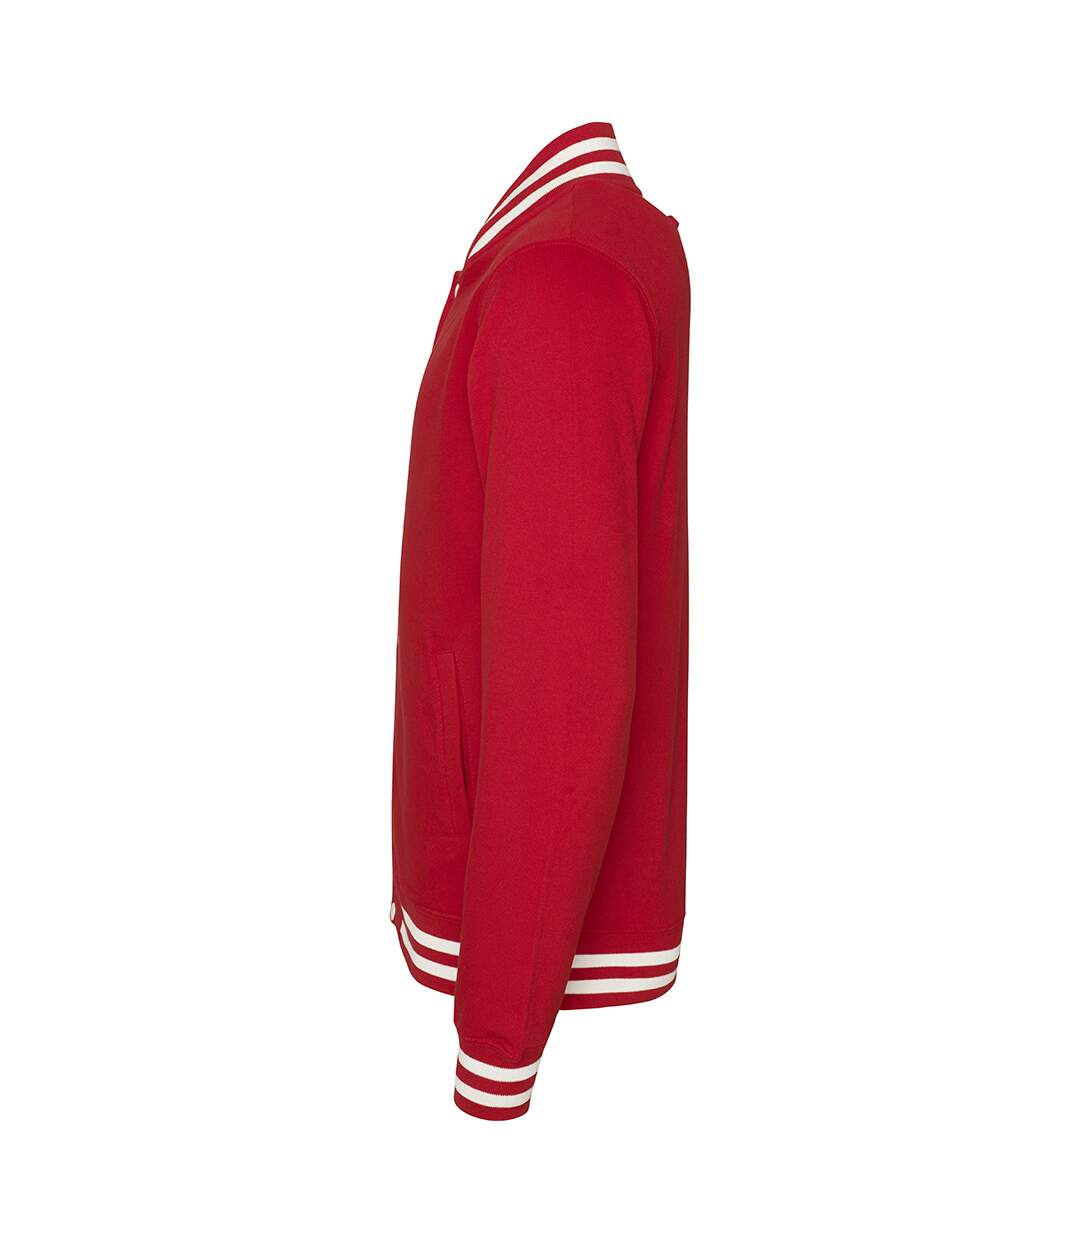 Awdis Mens College Jacket (Fire Red)